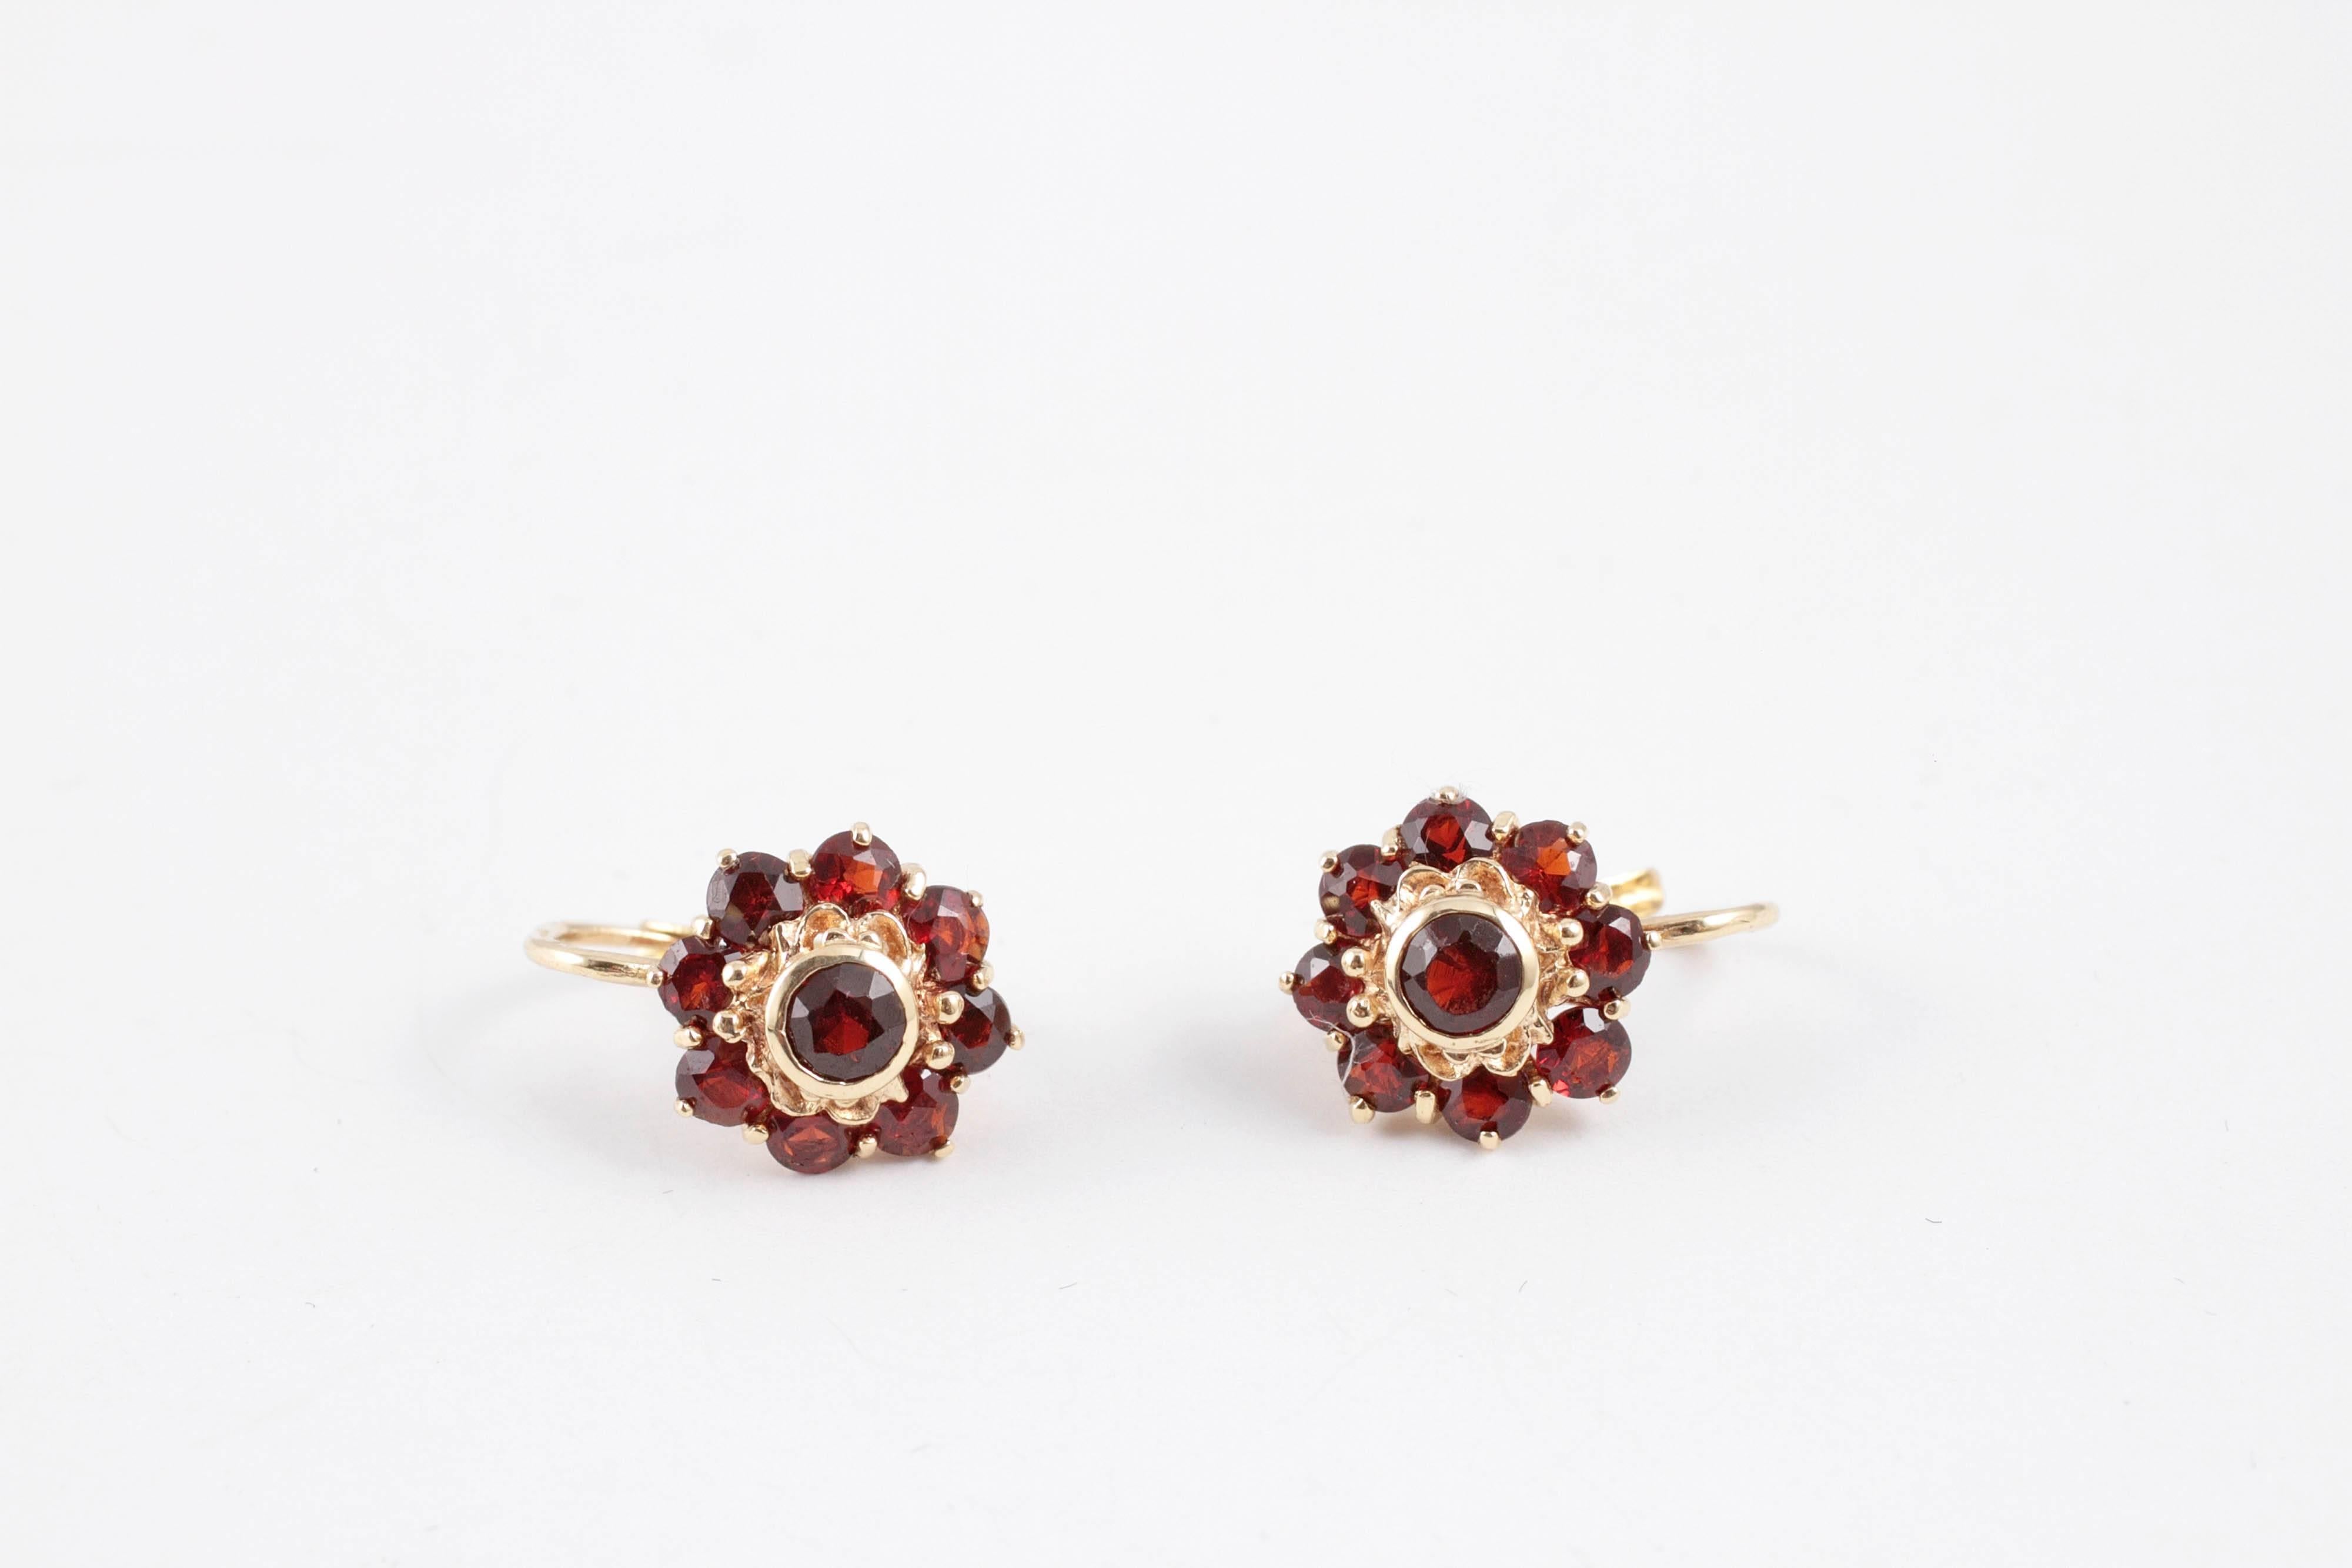 18K yellow gold garnet flower earrings, secured with a lever-back.  